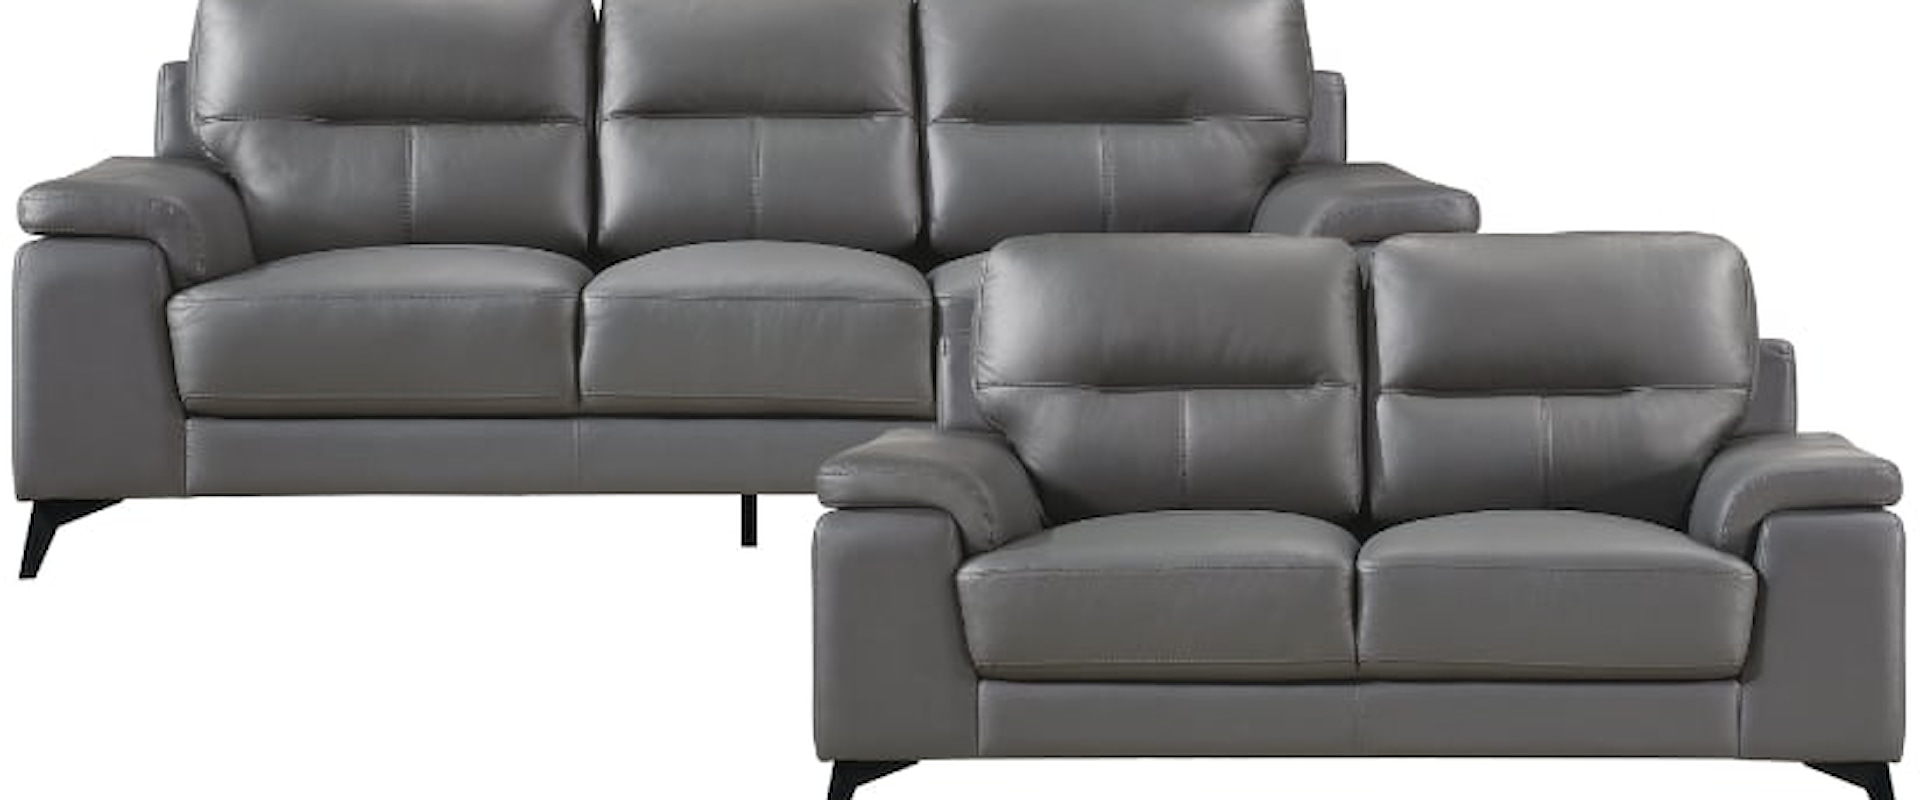 Contemporary 2-Piece Living Room Set with Pillow Arms